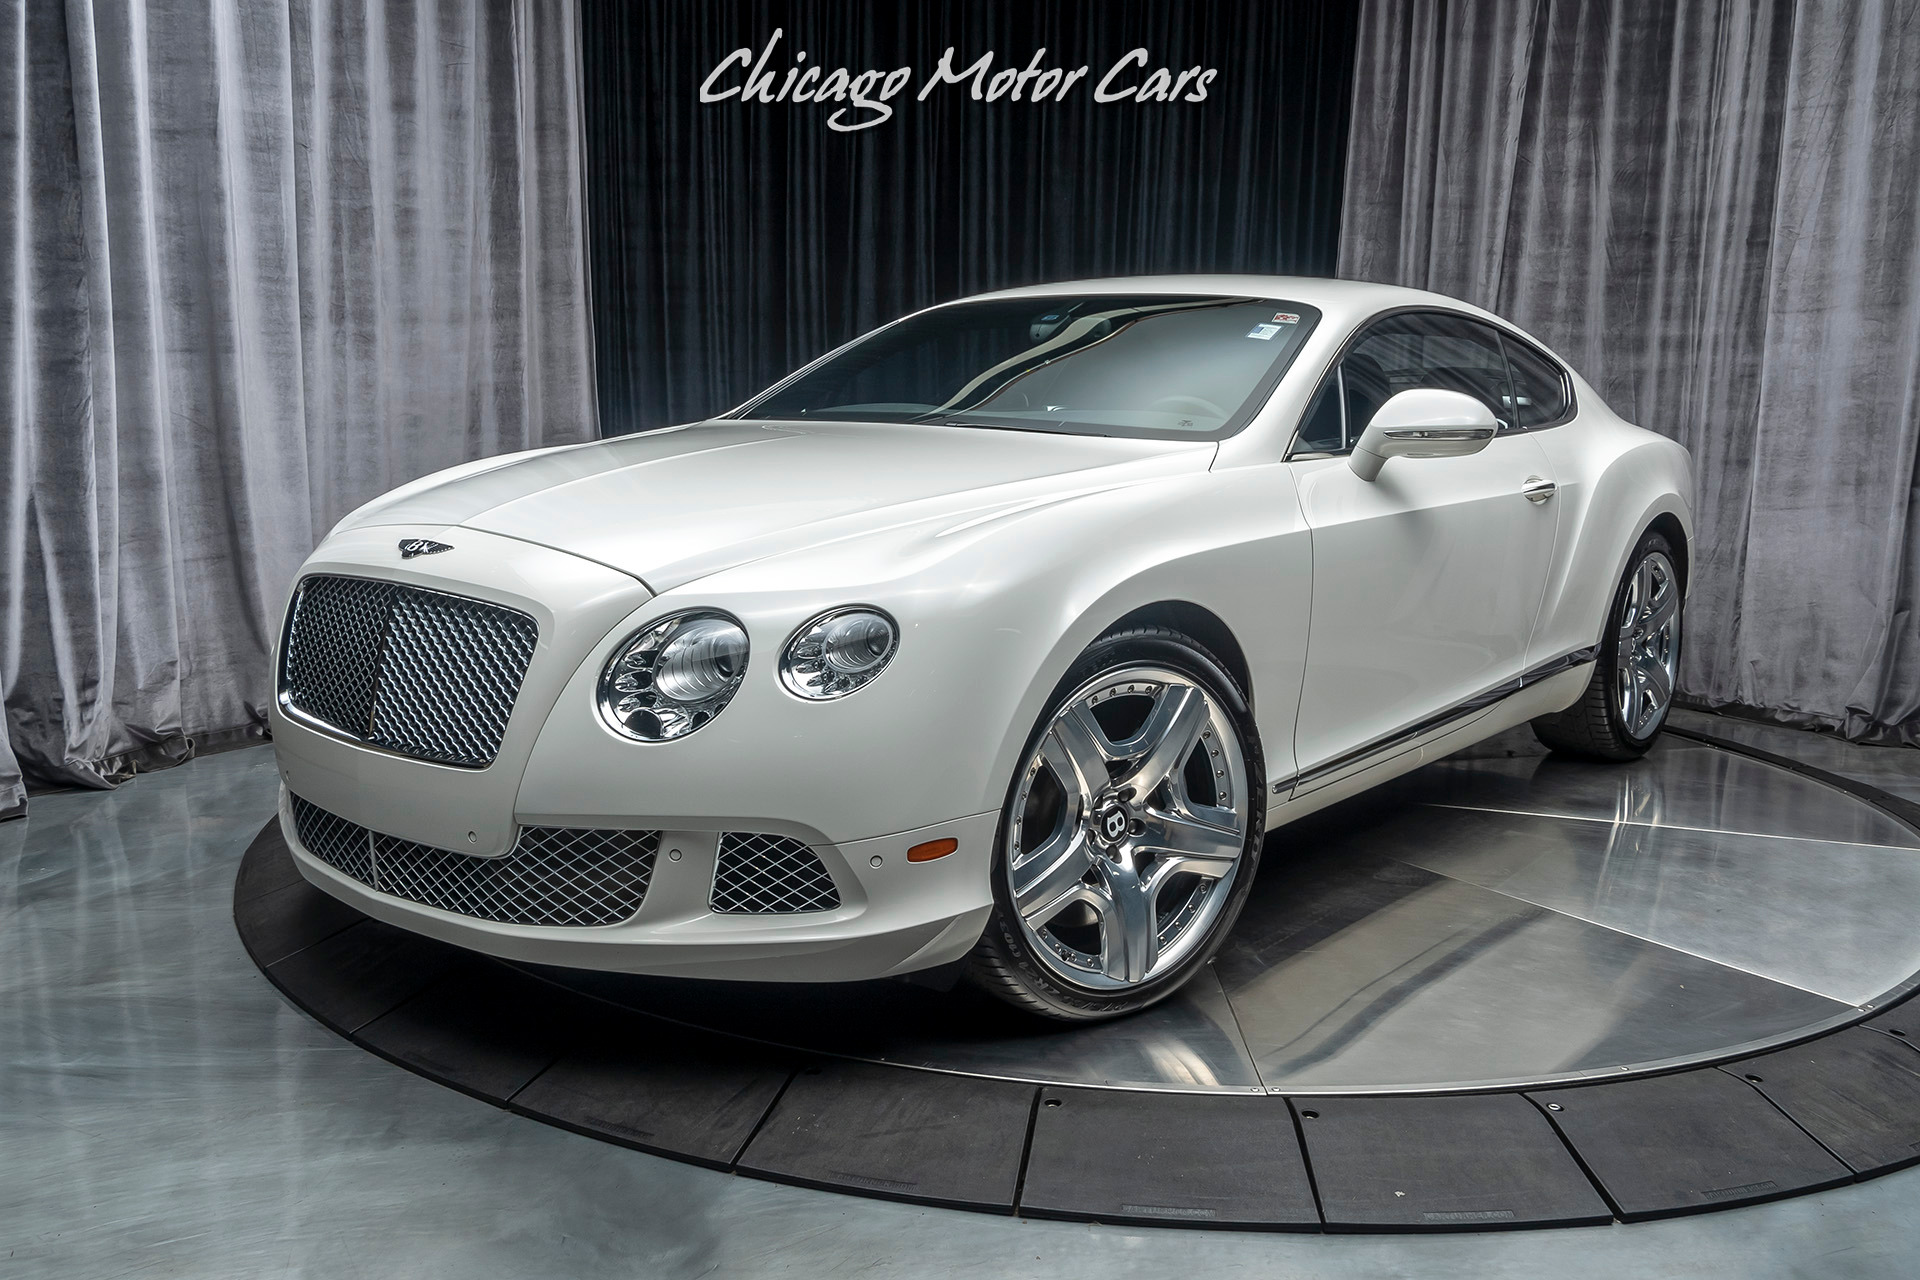 Used 2012 Bentley Continental GT Mulliner Coupe MSRP $208K+ FRESHLY  SERVICED! For Sale (Special Pricing) | Chicago Motor Cars Stock #16352